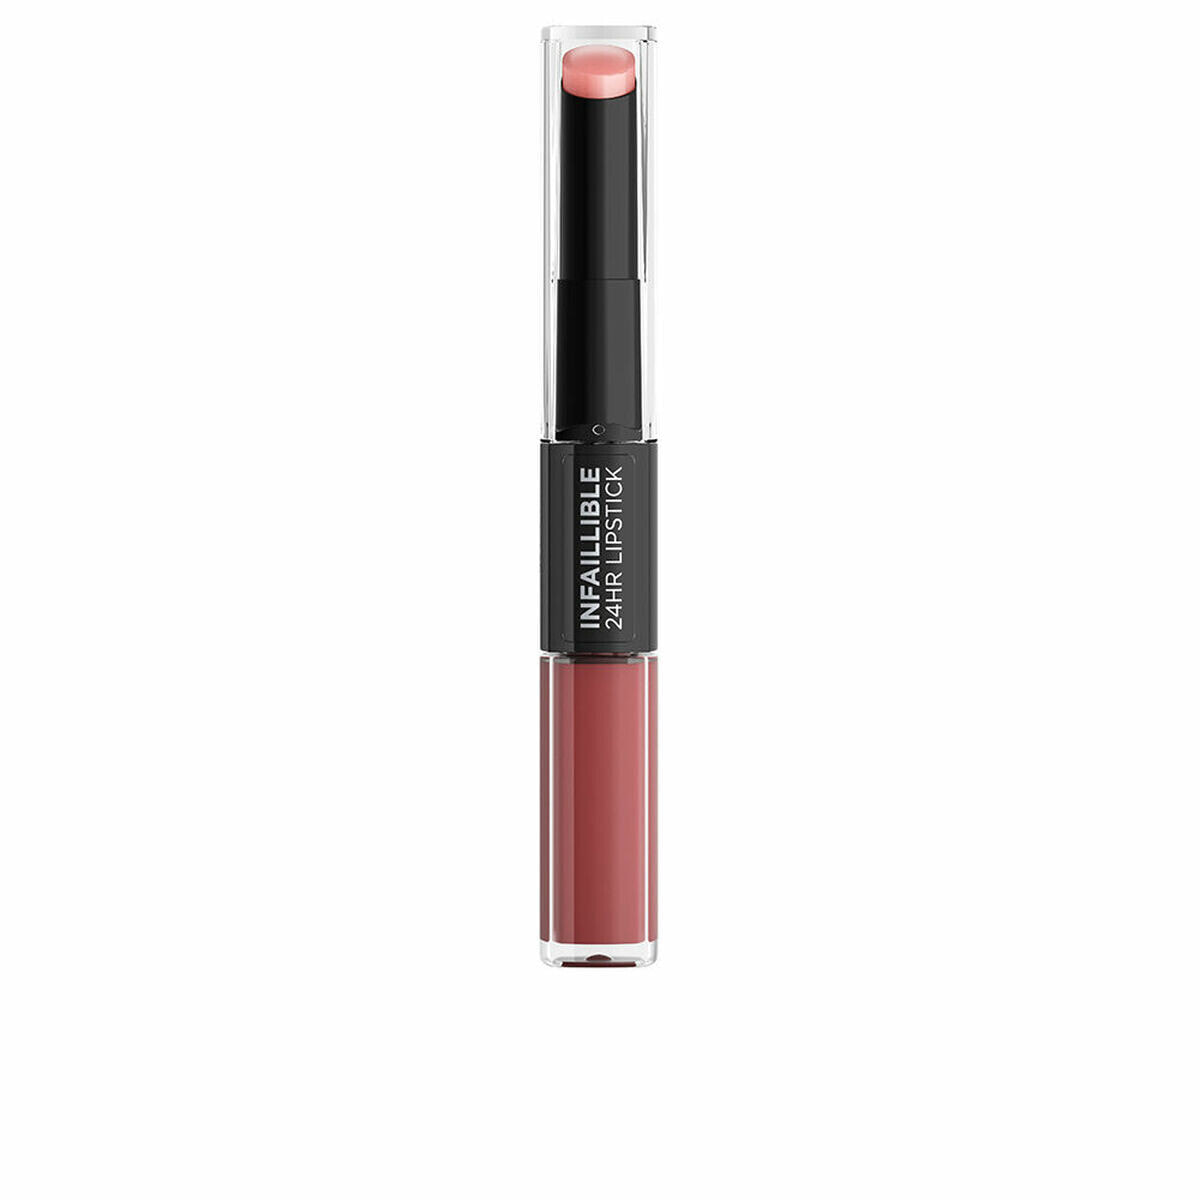 Liquid lipstick L'Oreal Make Up Infaillible 24 hours Nº 806 Infinite intimacy 5,7 g